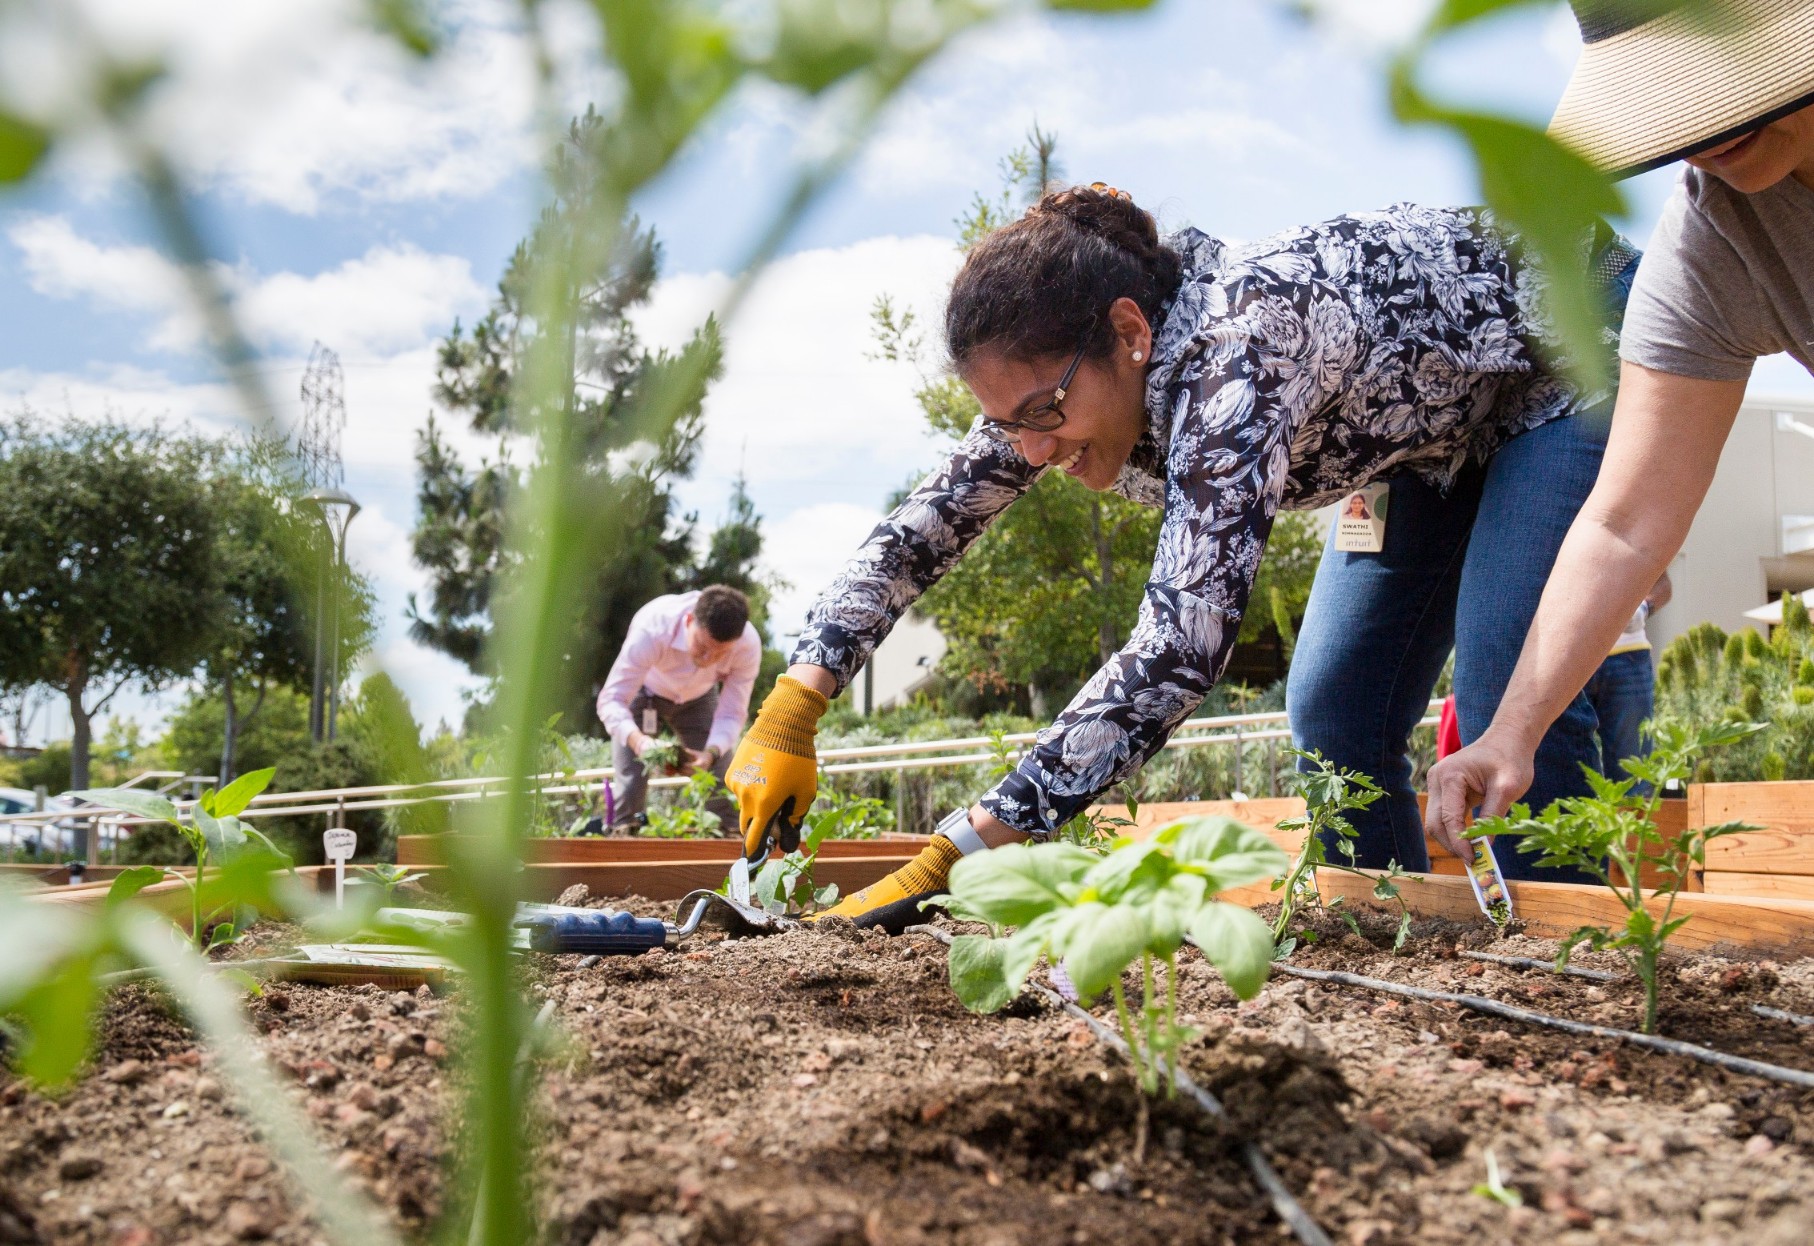 92% felt a reduction in their stress level from participating in the gardening program.